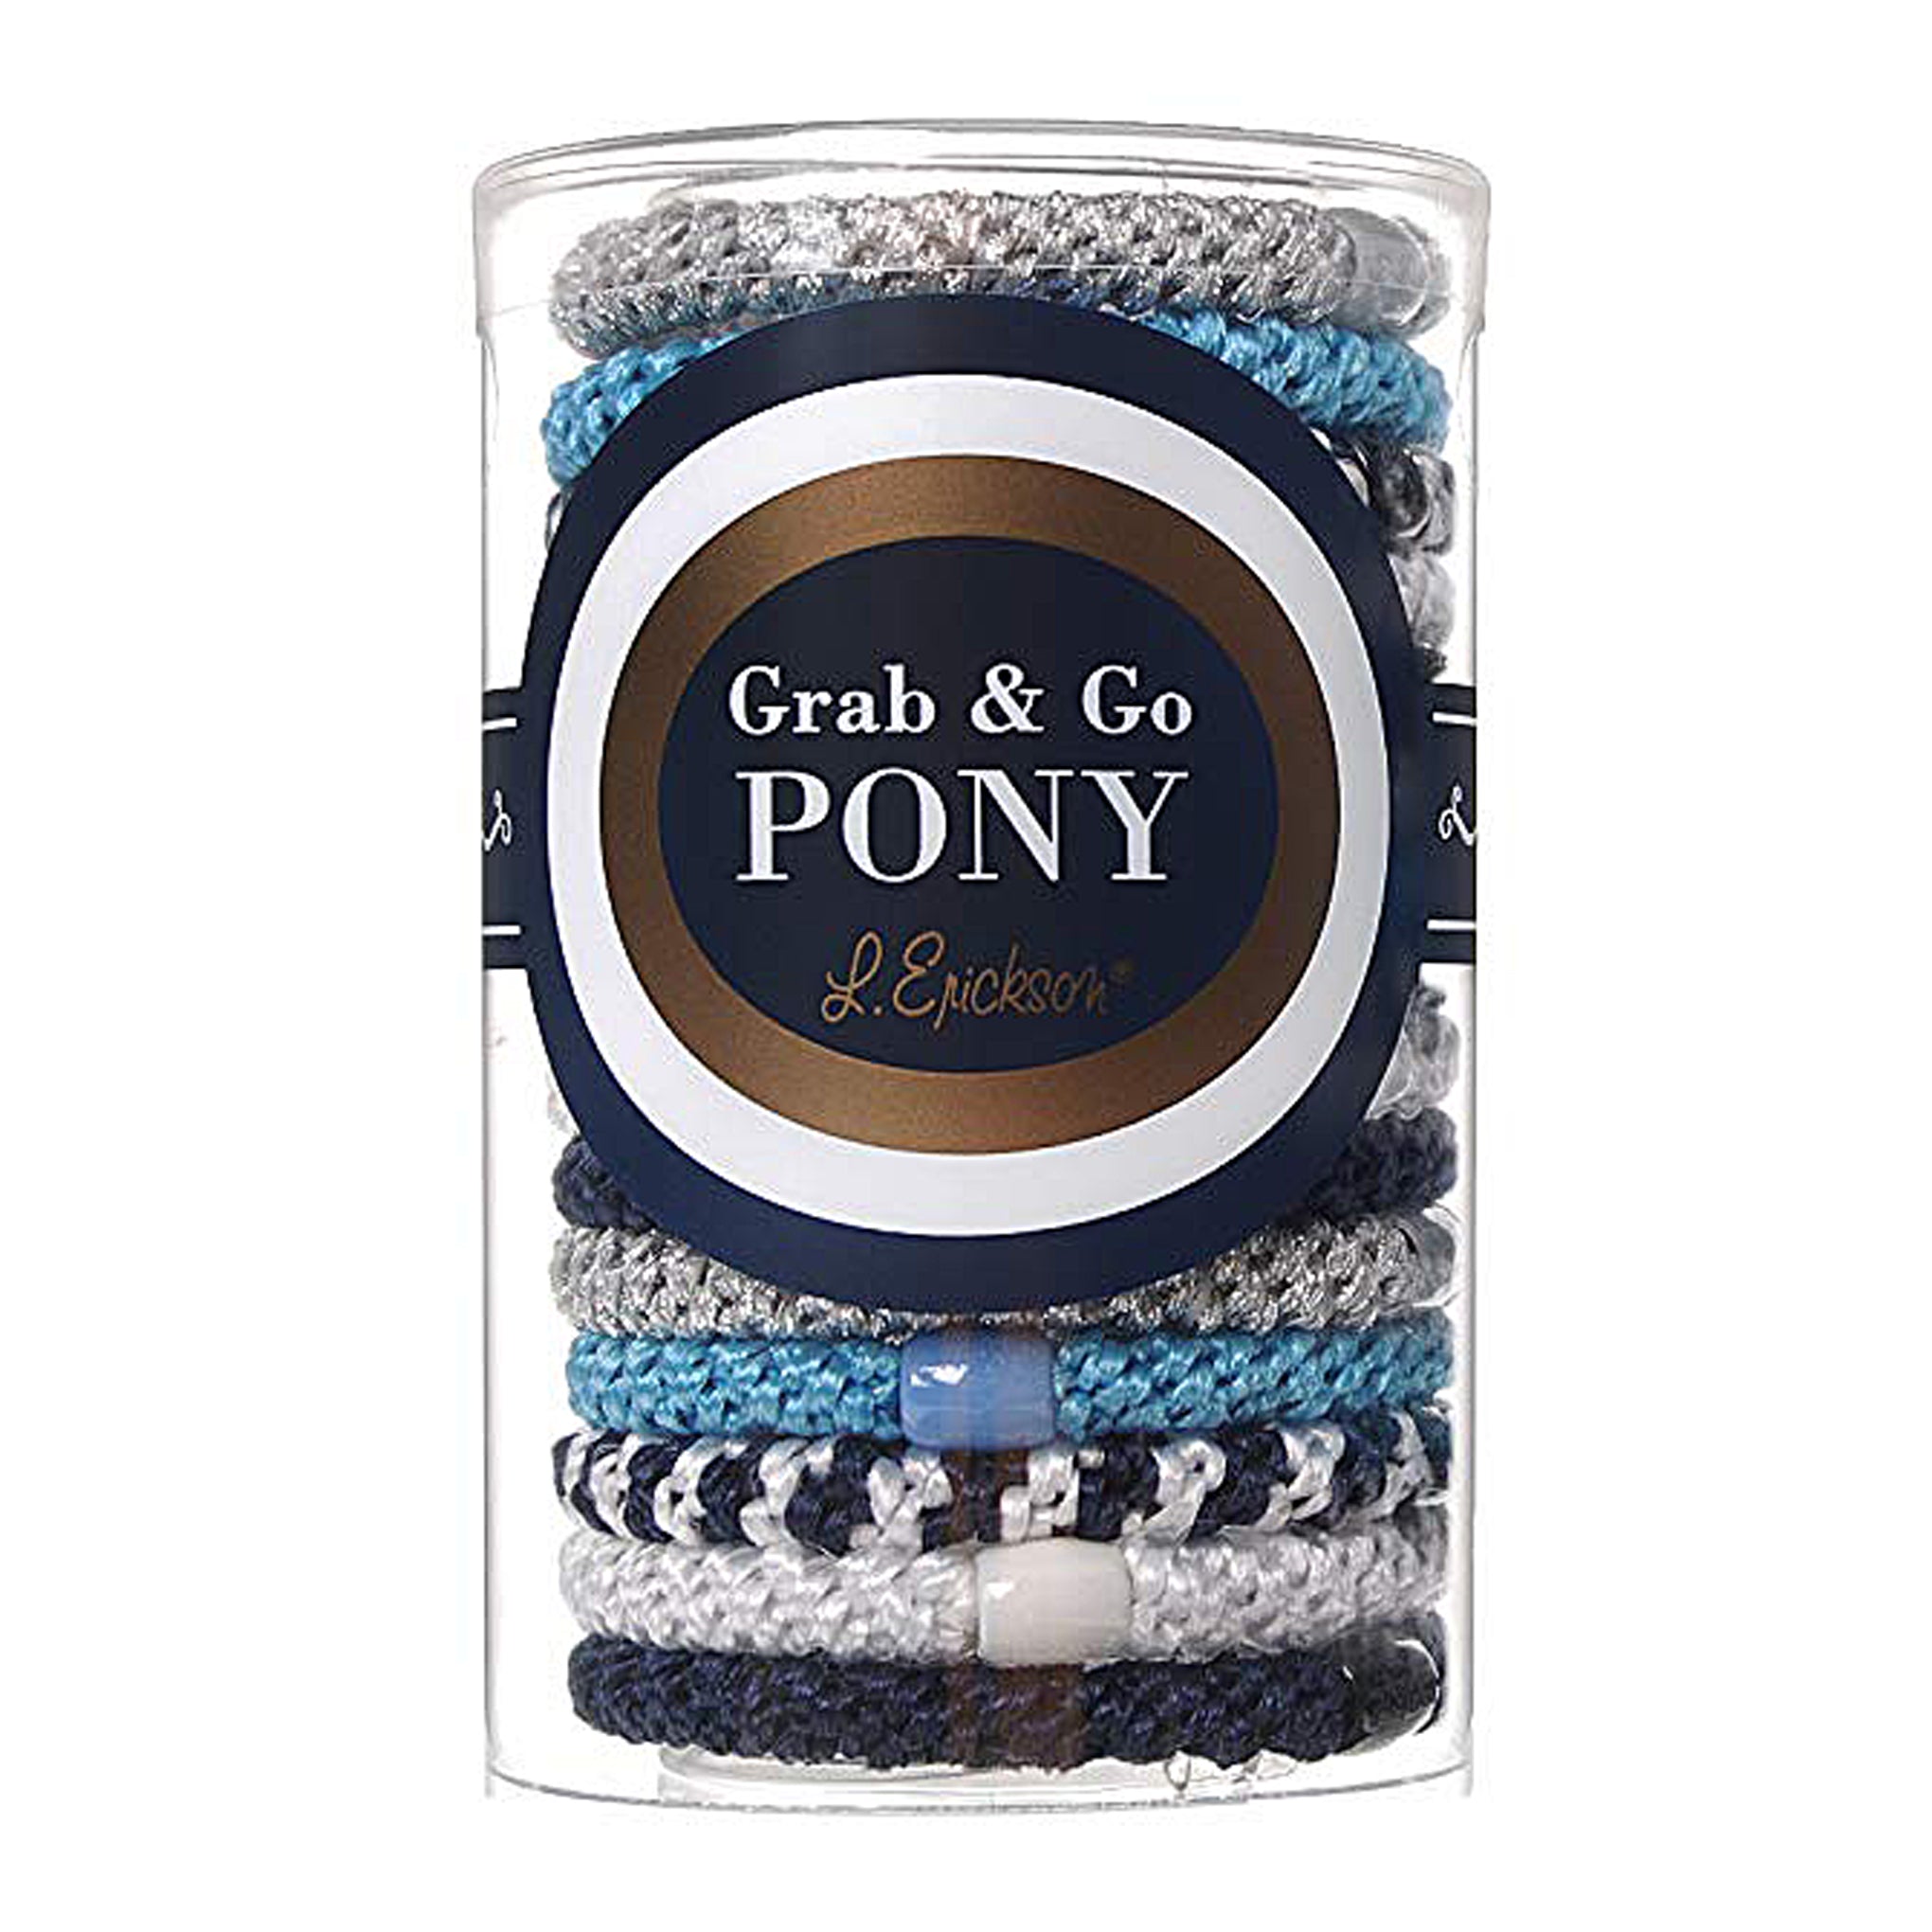 image of L.Erickson Grab and Go Pony Tube Hair Ties in Nautilus 15 Pack in gift tube